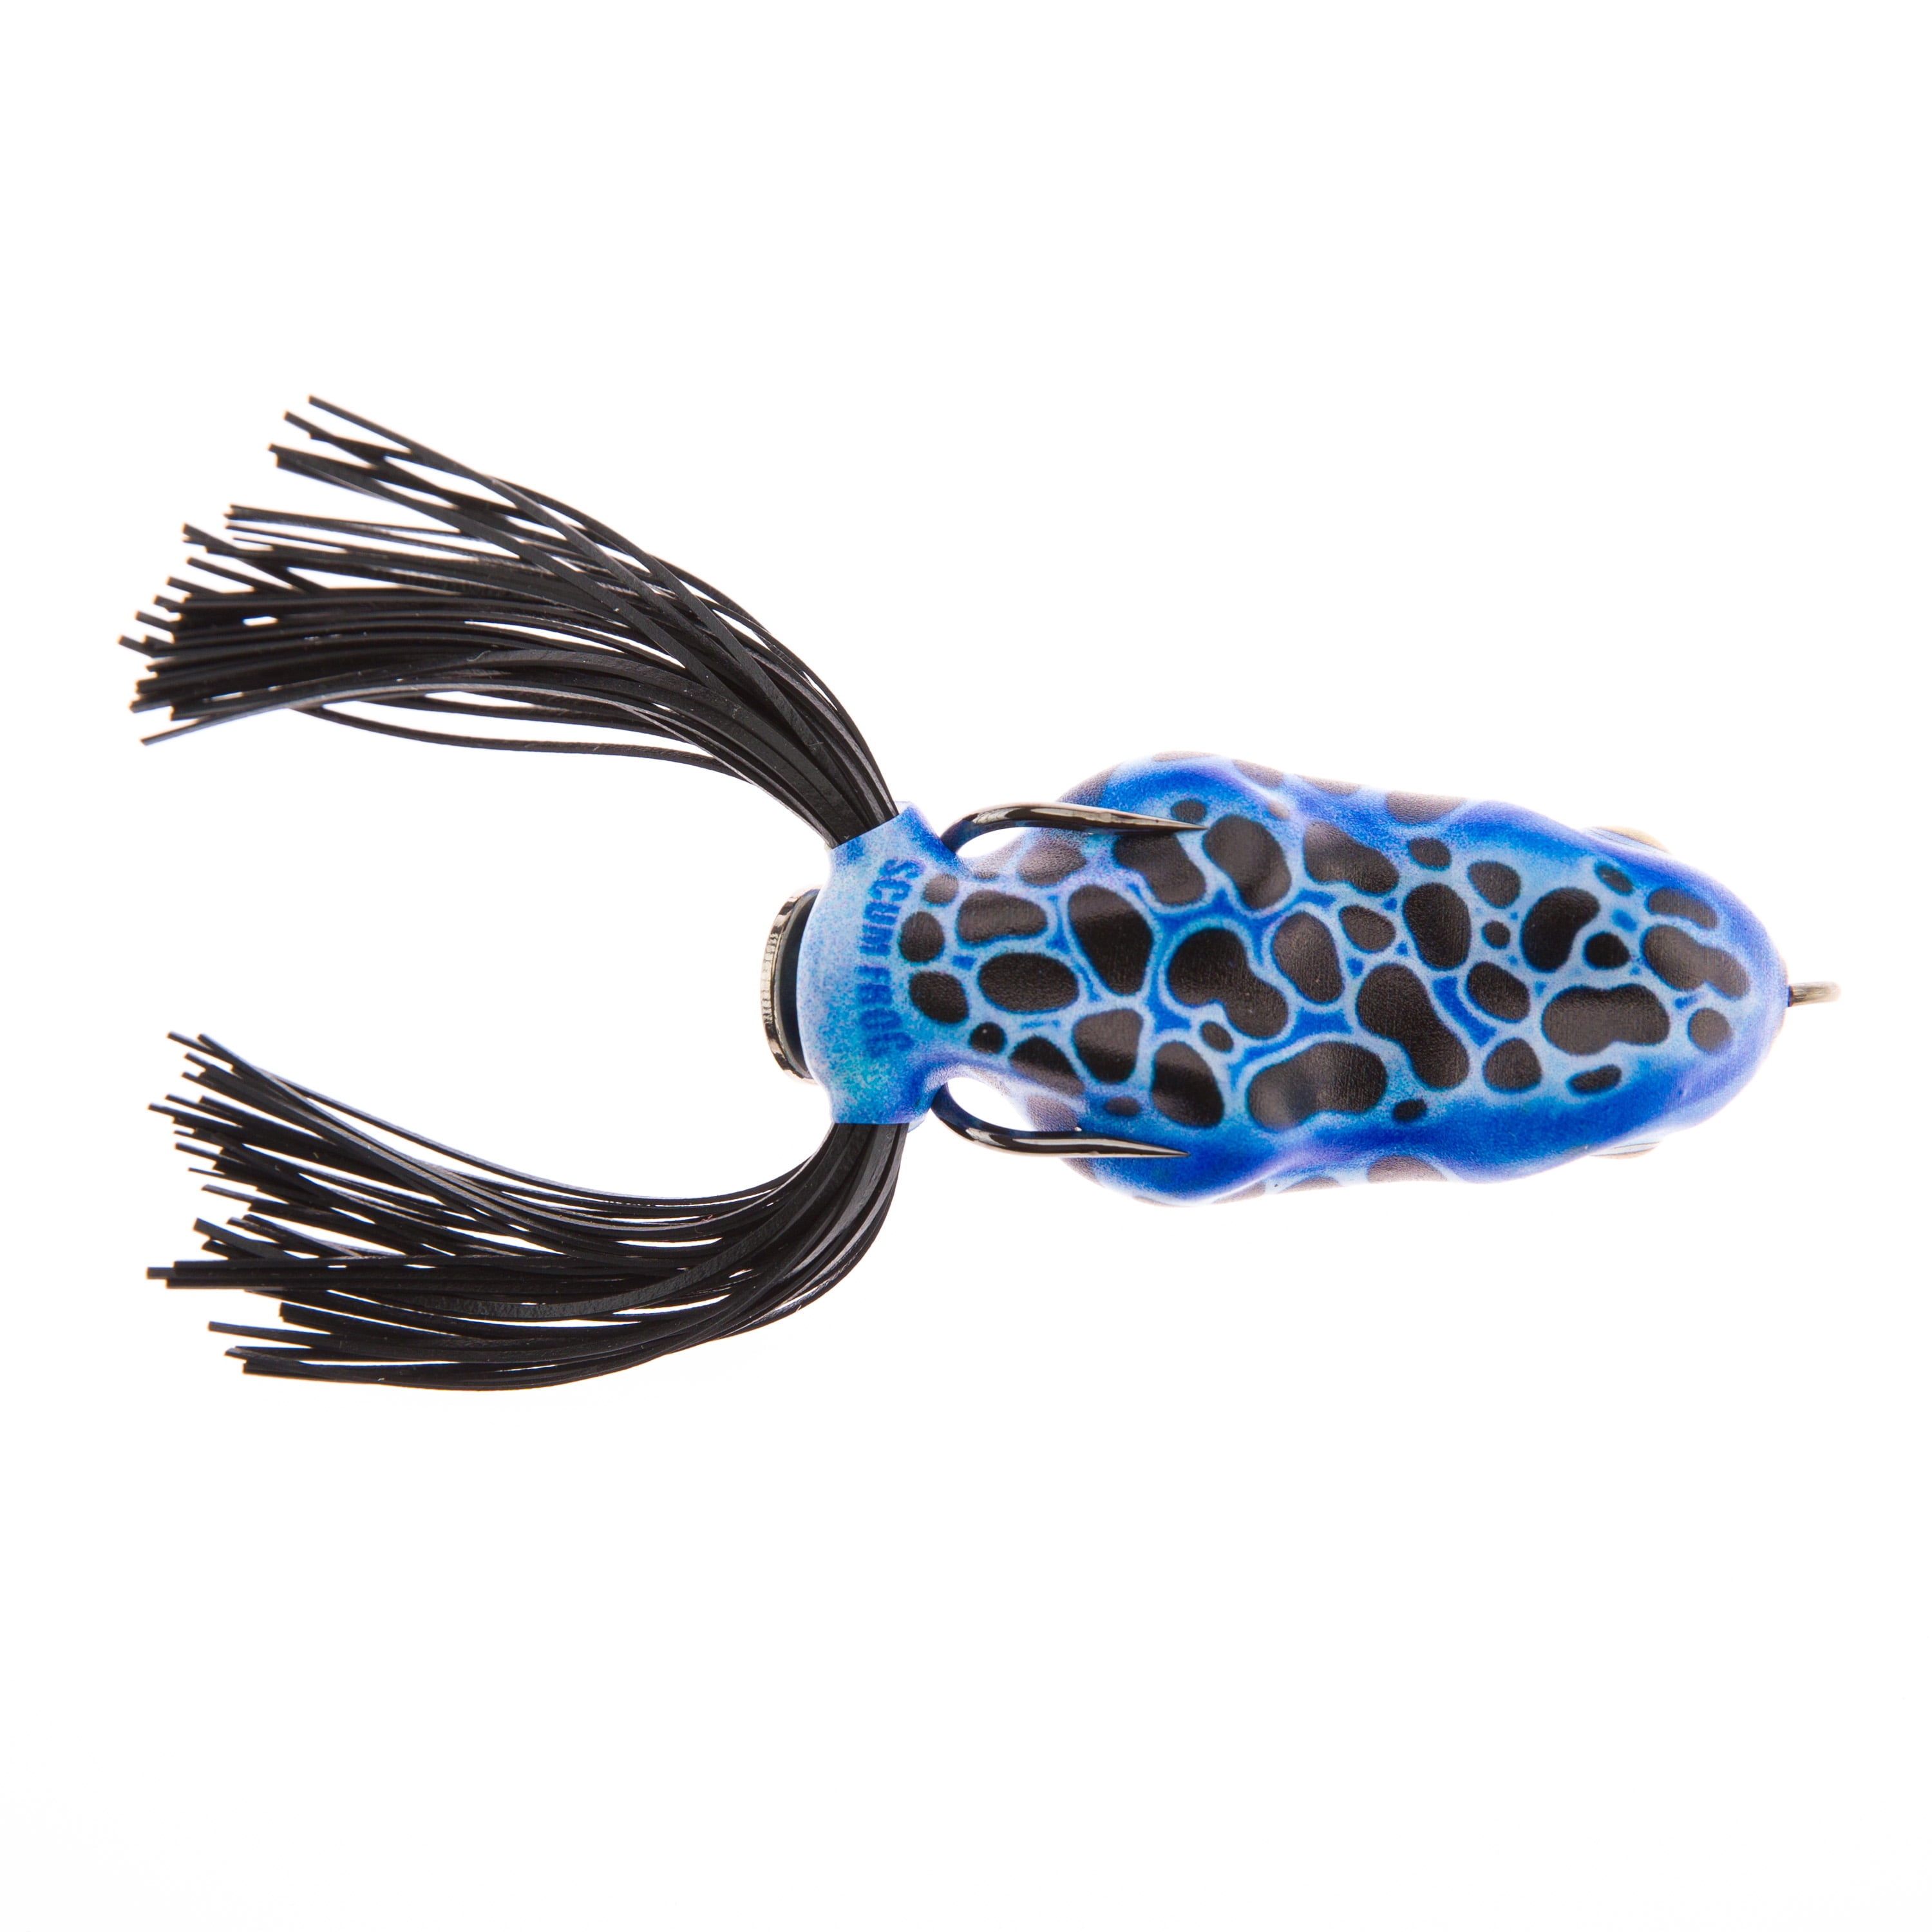 Scum Frog 1/2 oz Painted Trophy Series, Blue Poison, Top Water Hollow Body  Frog Lure